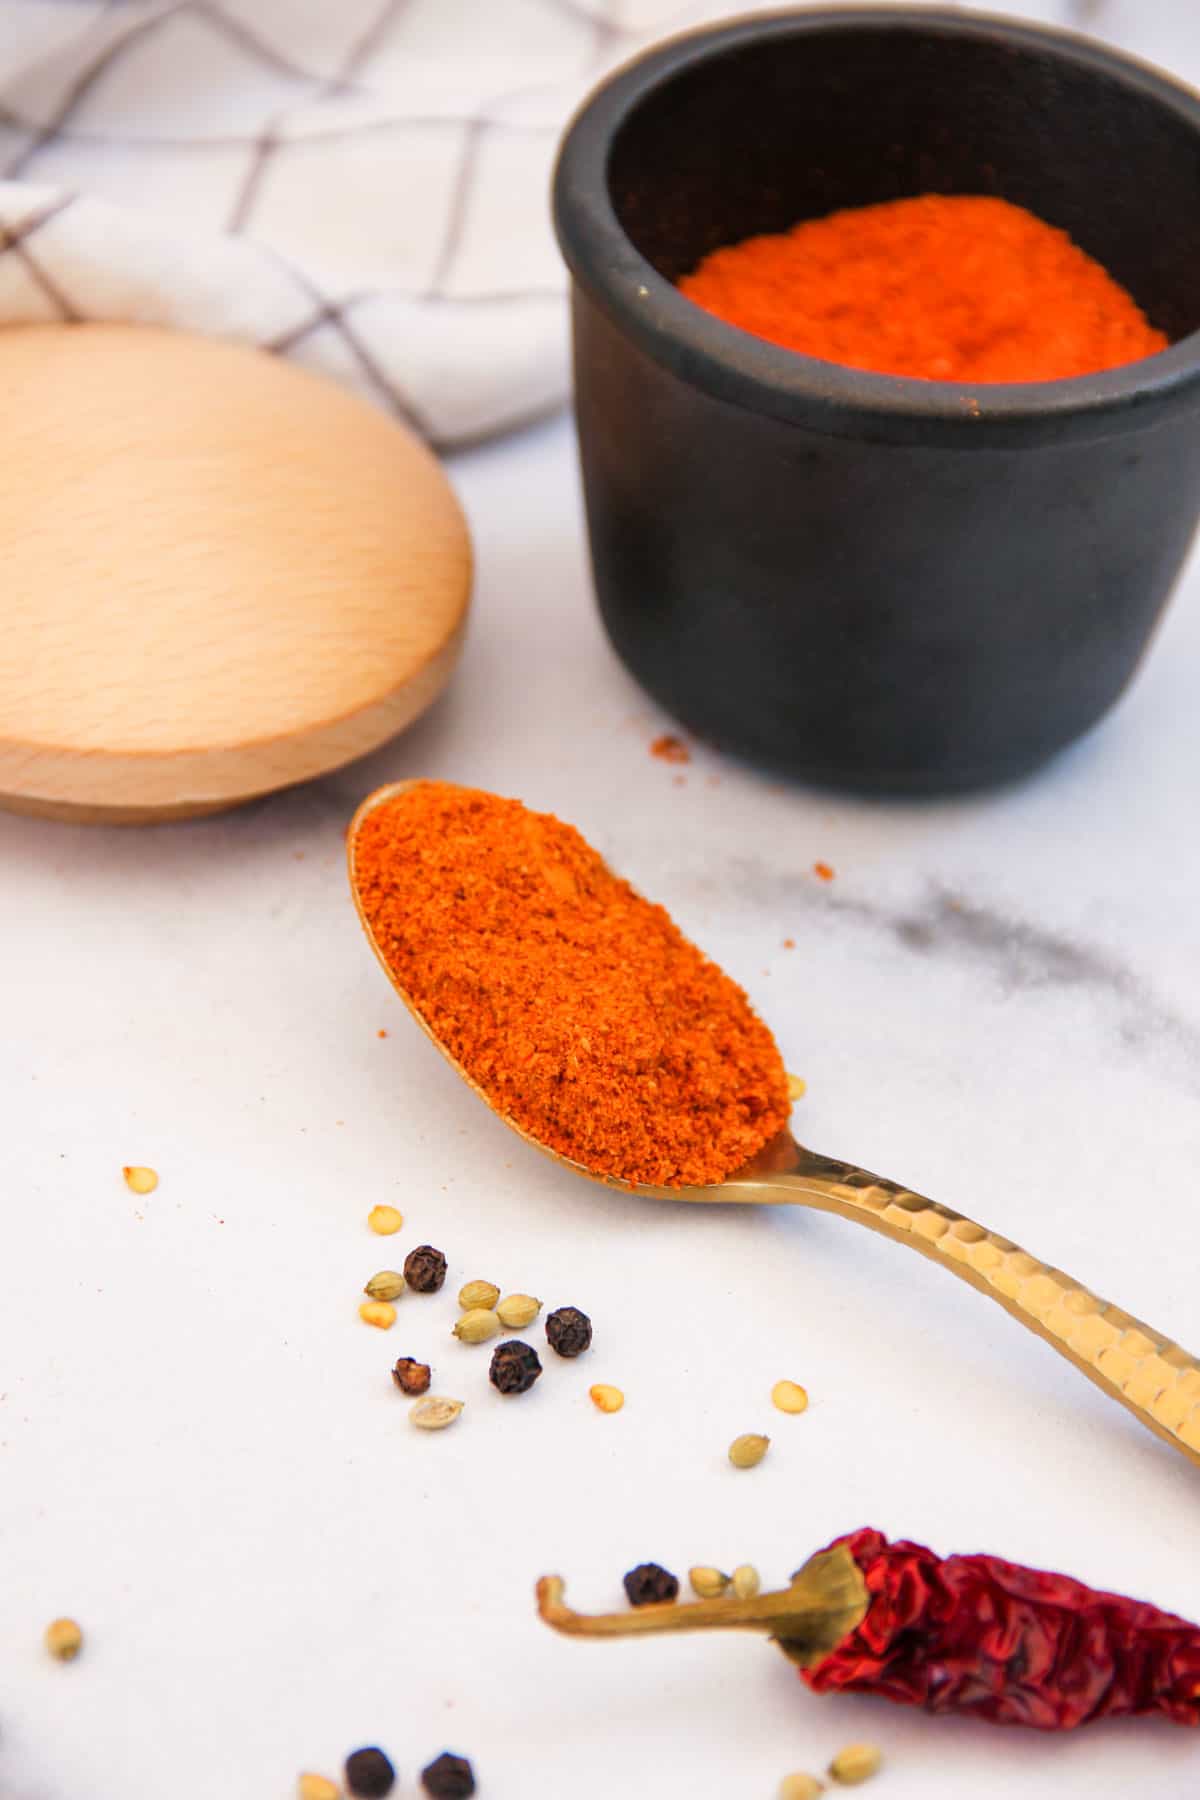 sambar powder in a spoon next to a jar and whole spices 